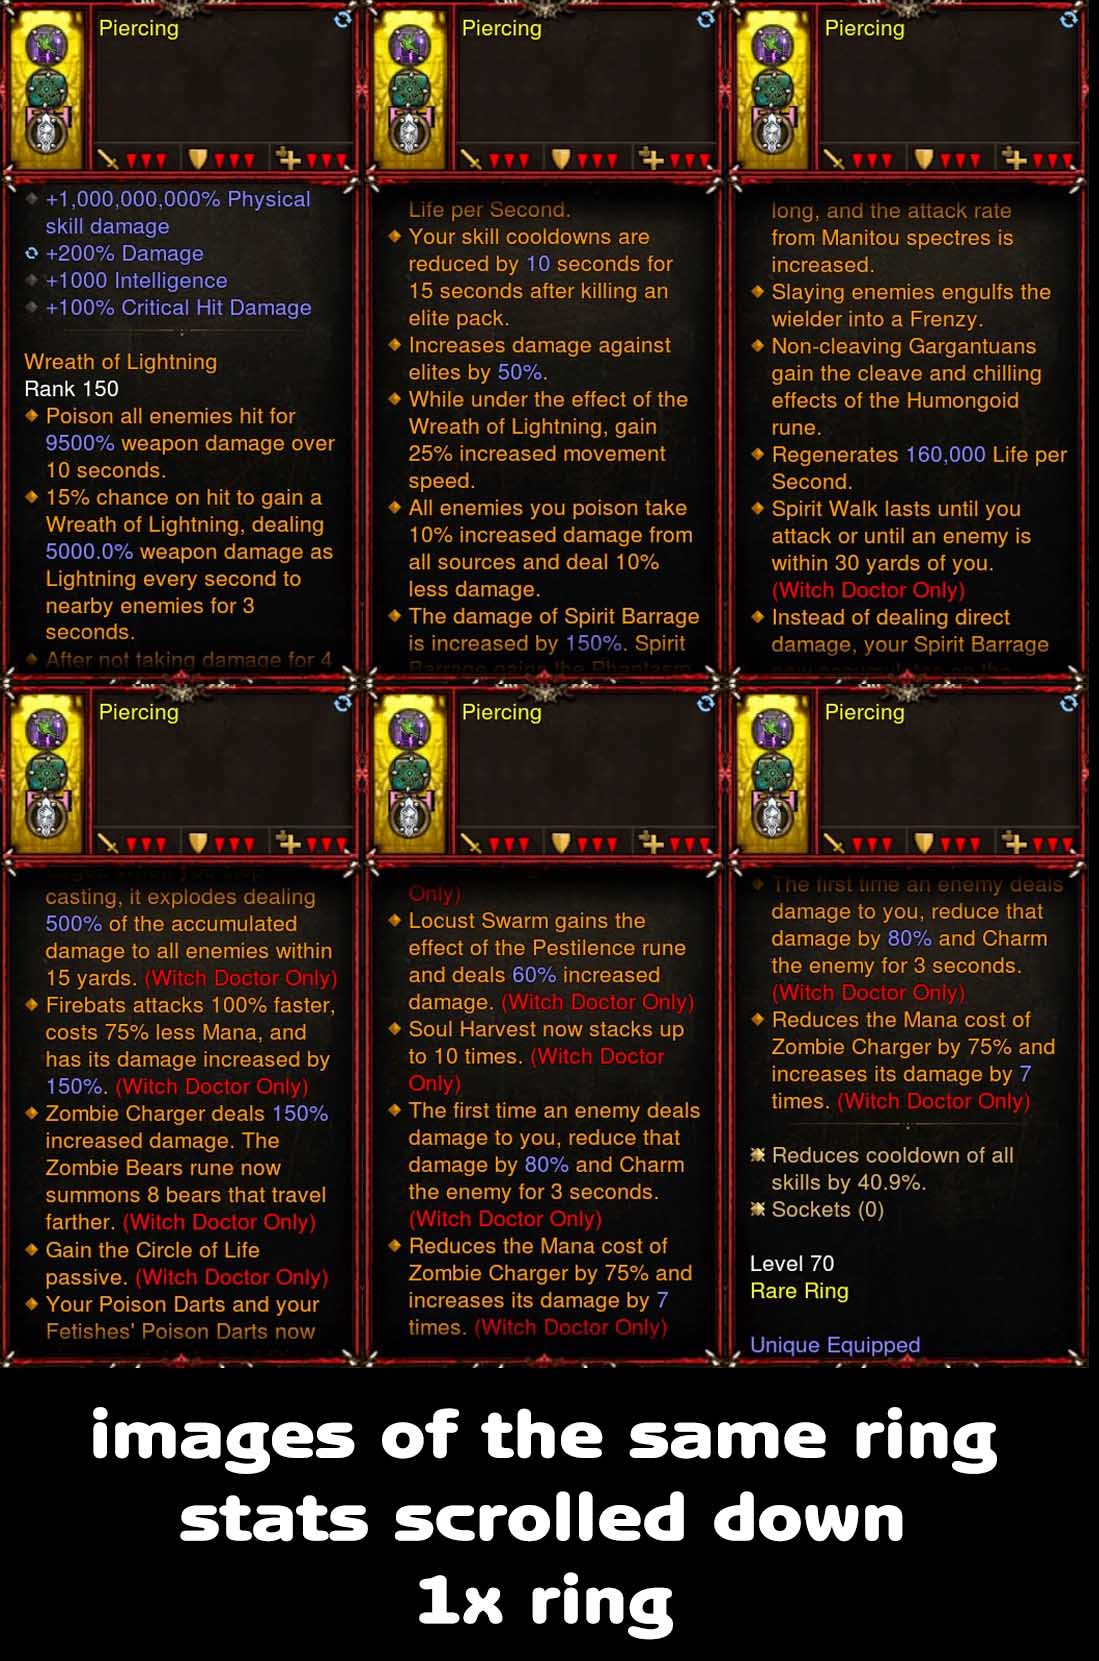 [Primal-Ethereal Infused] Legendary Affixes 100000000% Ring for Witch Doctor Piercing Diablo 3 Mods ROS Seasonal and Non Seasonal Save Mod - Modded Items and Gear - Hacks - Cheats - Trainers for Playstation 4 - Playstation 5 - Nintendo Switch - Xbox One